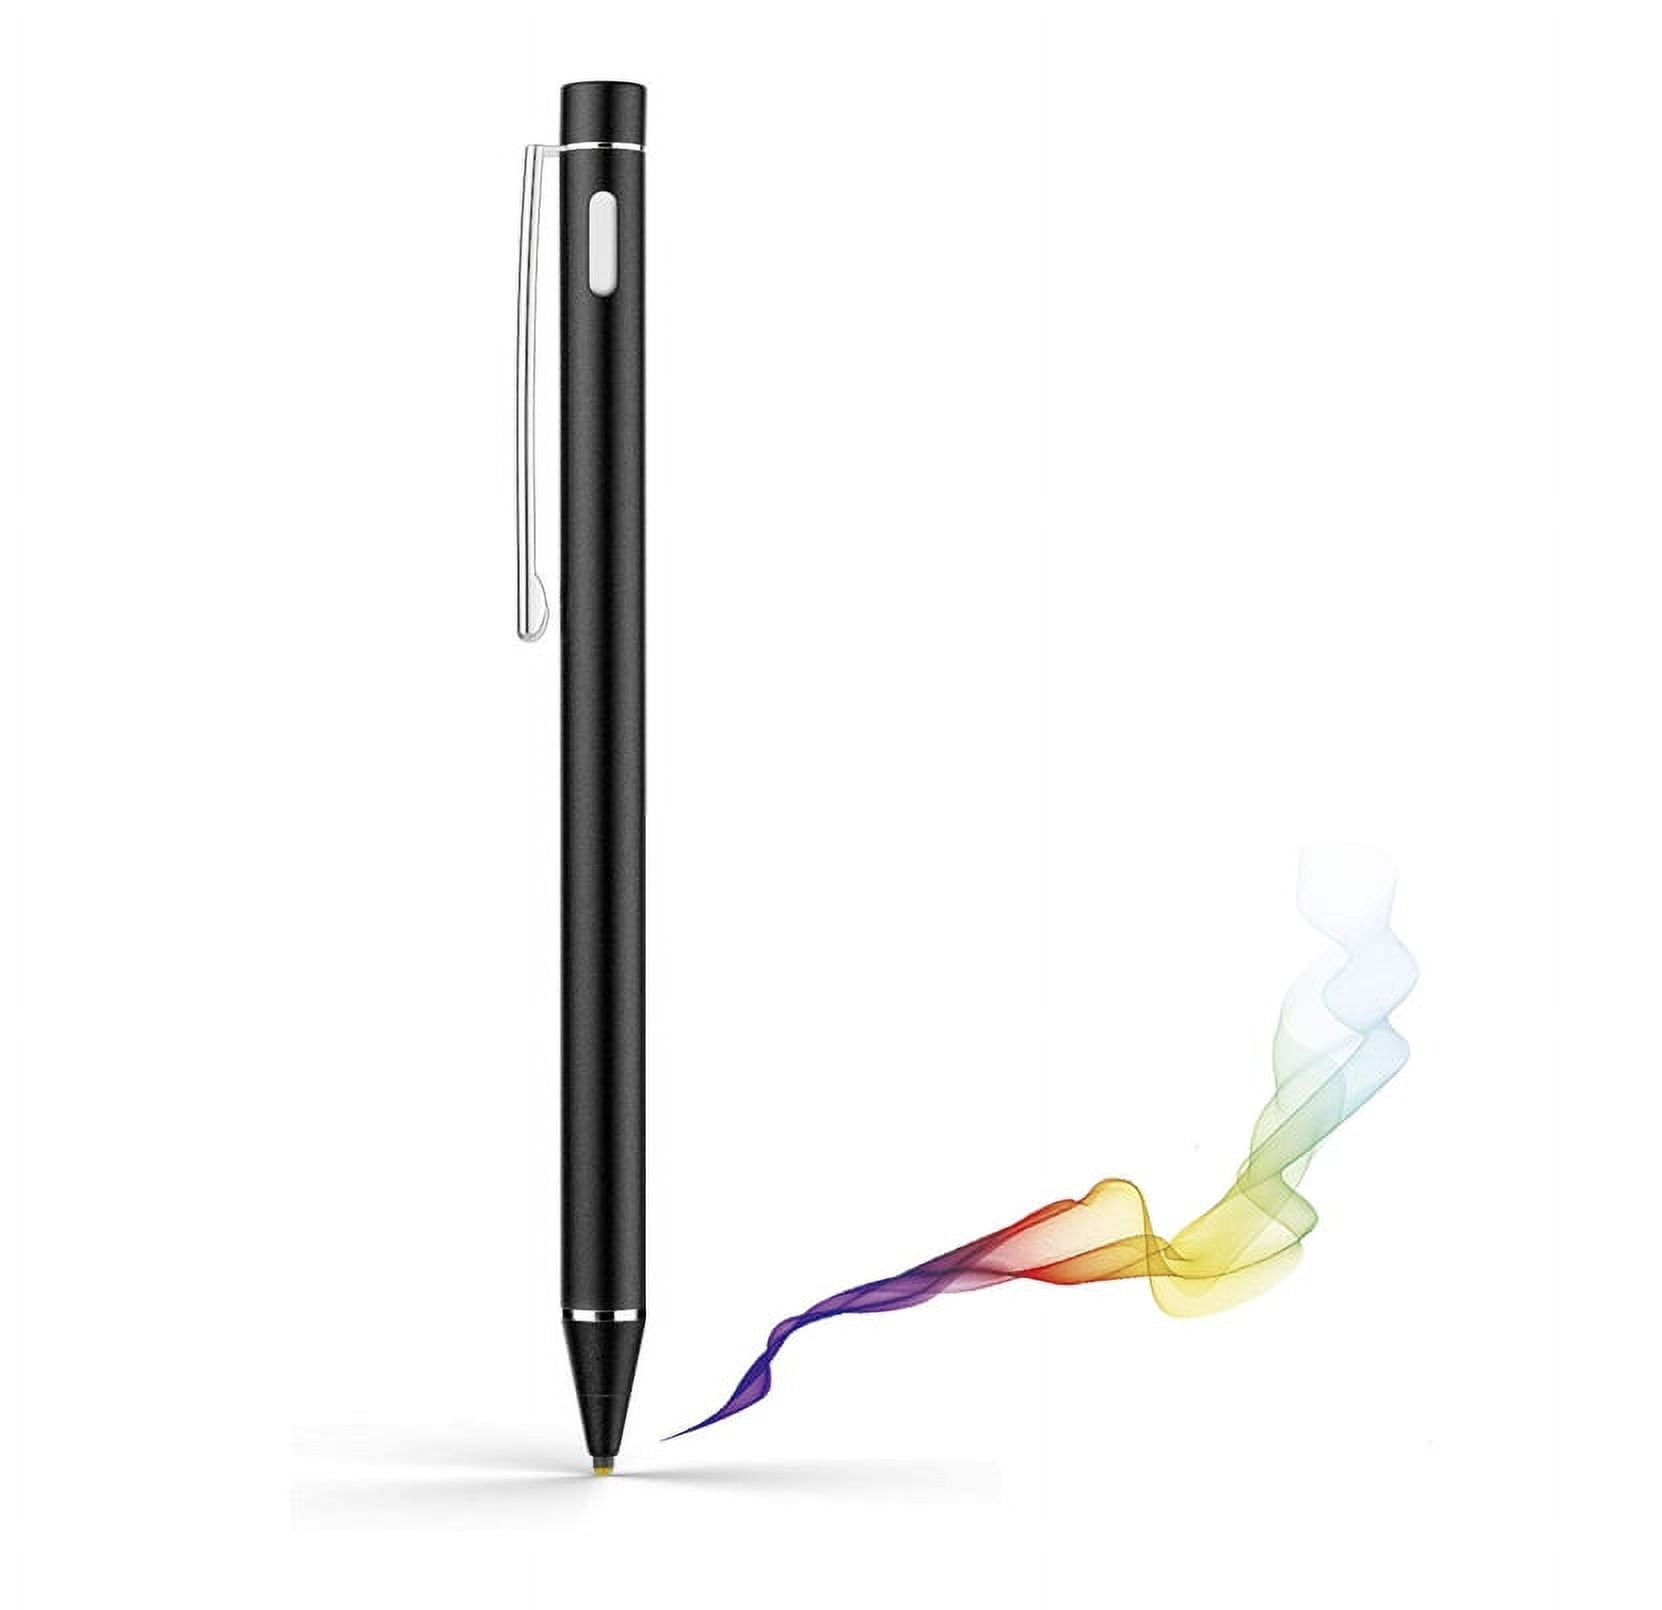 Lenovo Active Pen 2 for Think